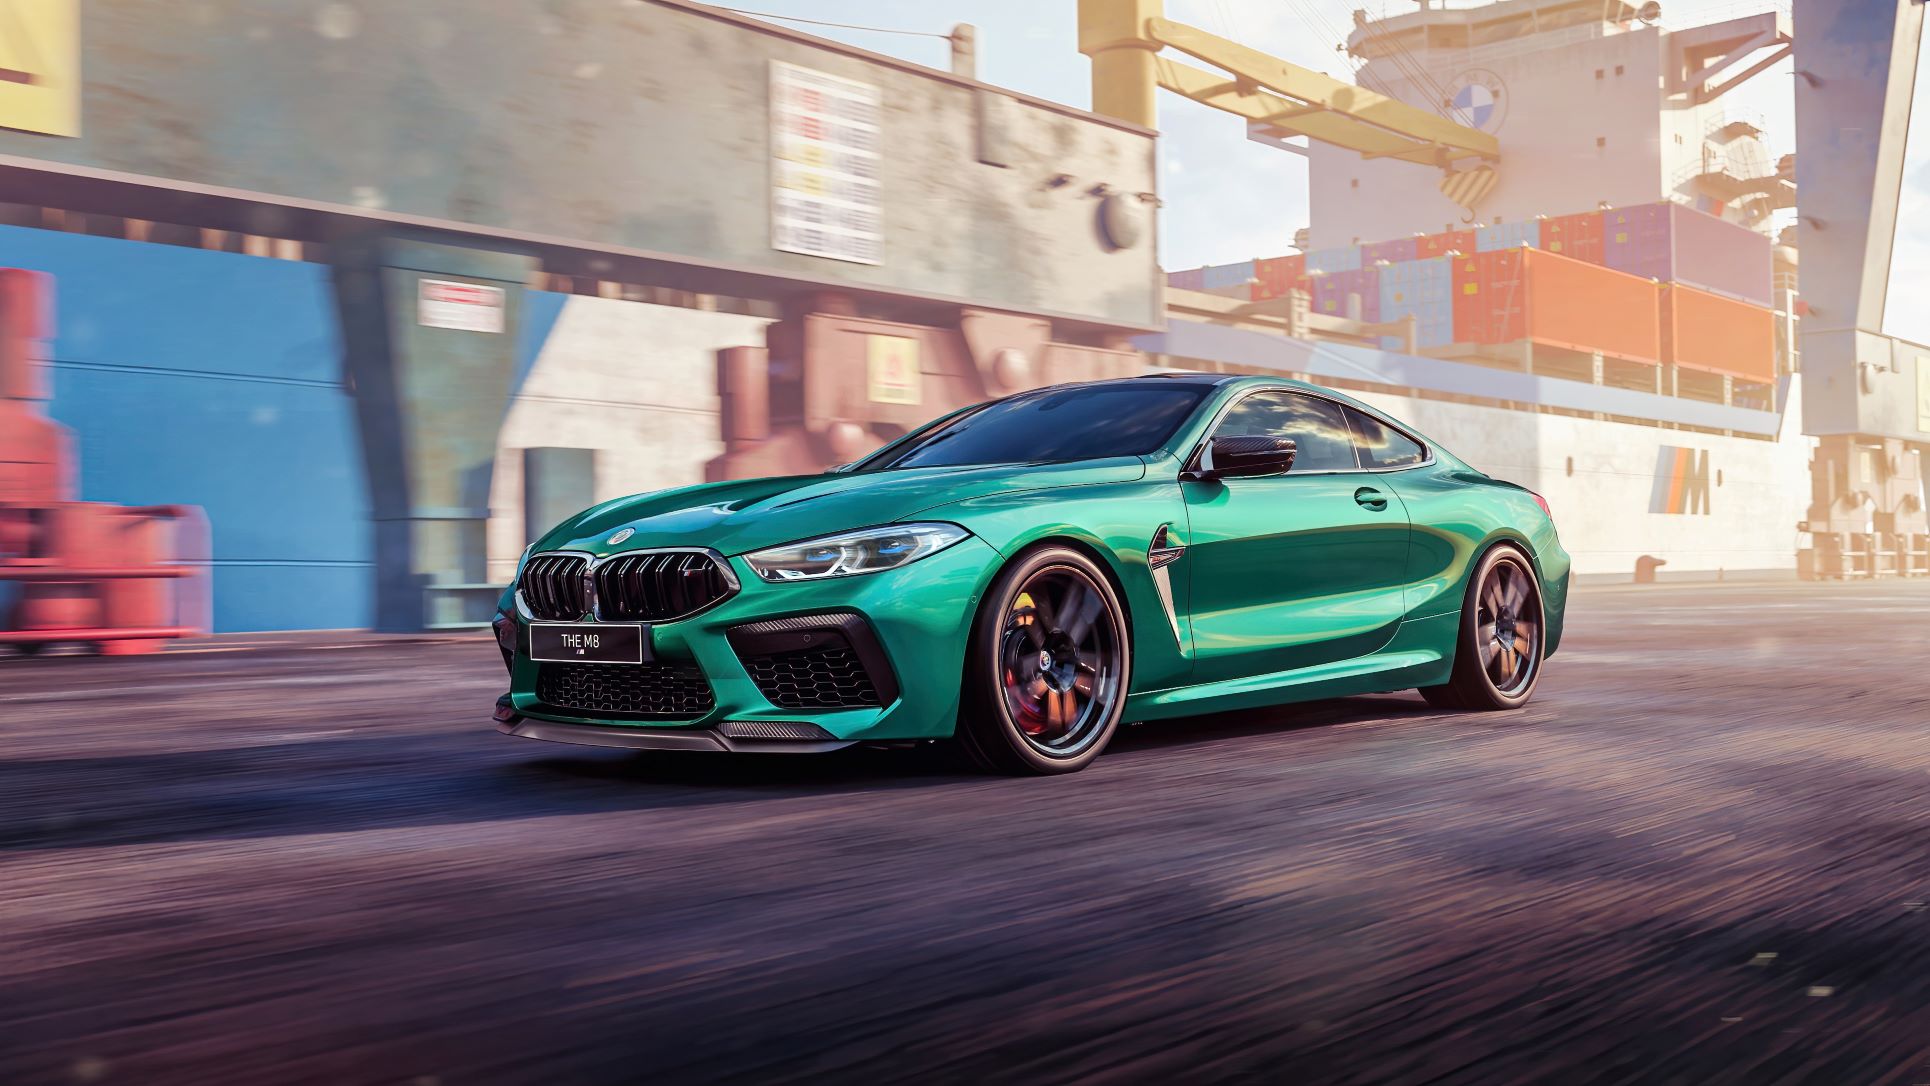 BMW India has launched an exclusive ‘50 Jahre M Edition’ of the BMW M8 Competition Coupé